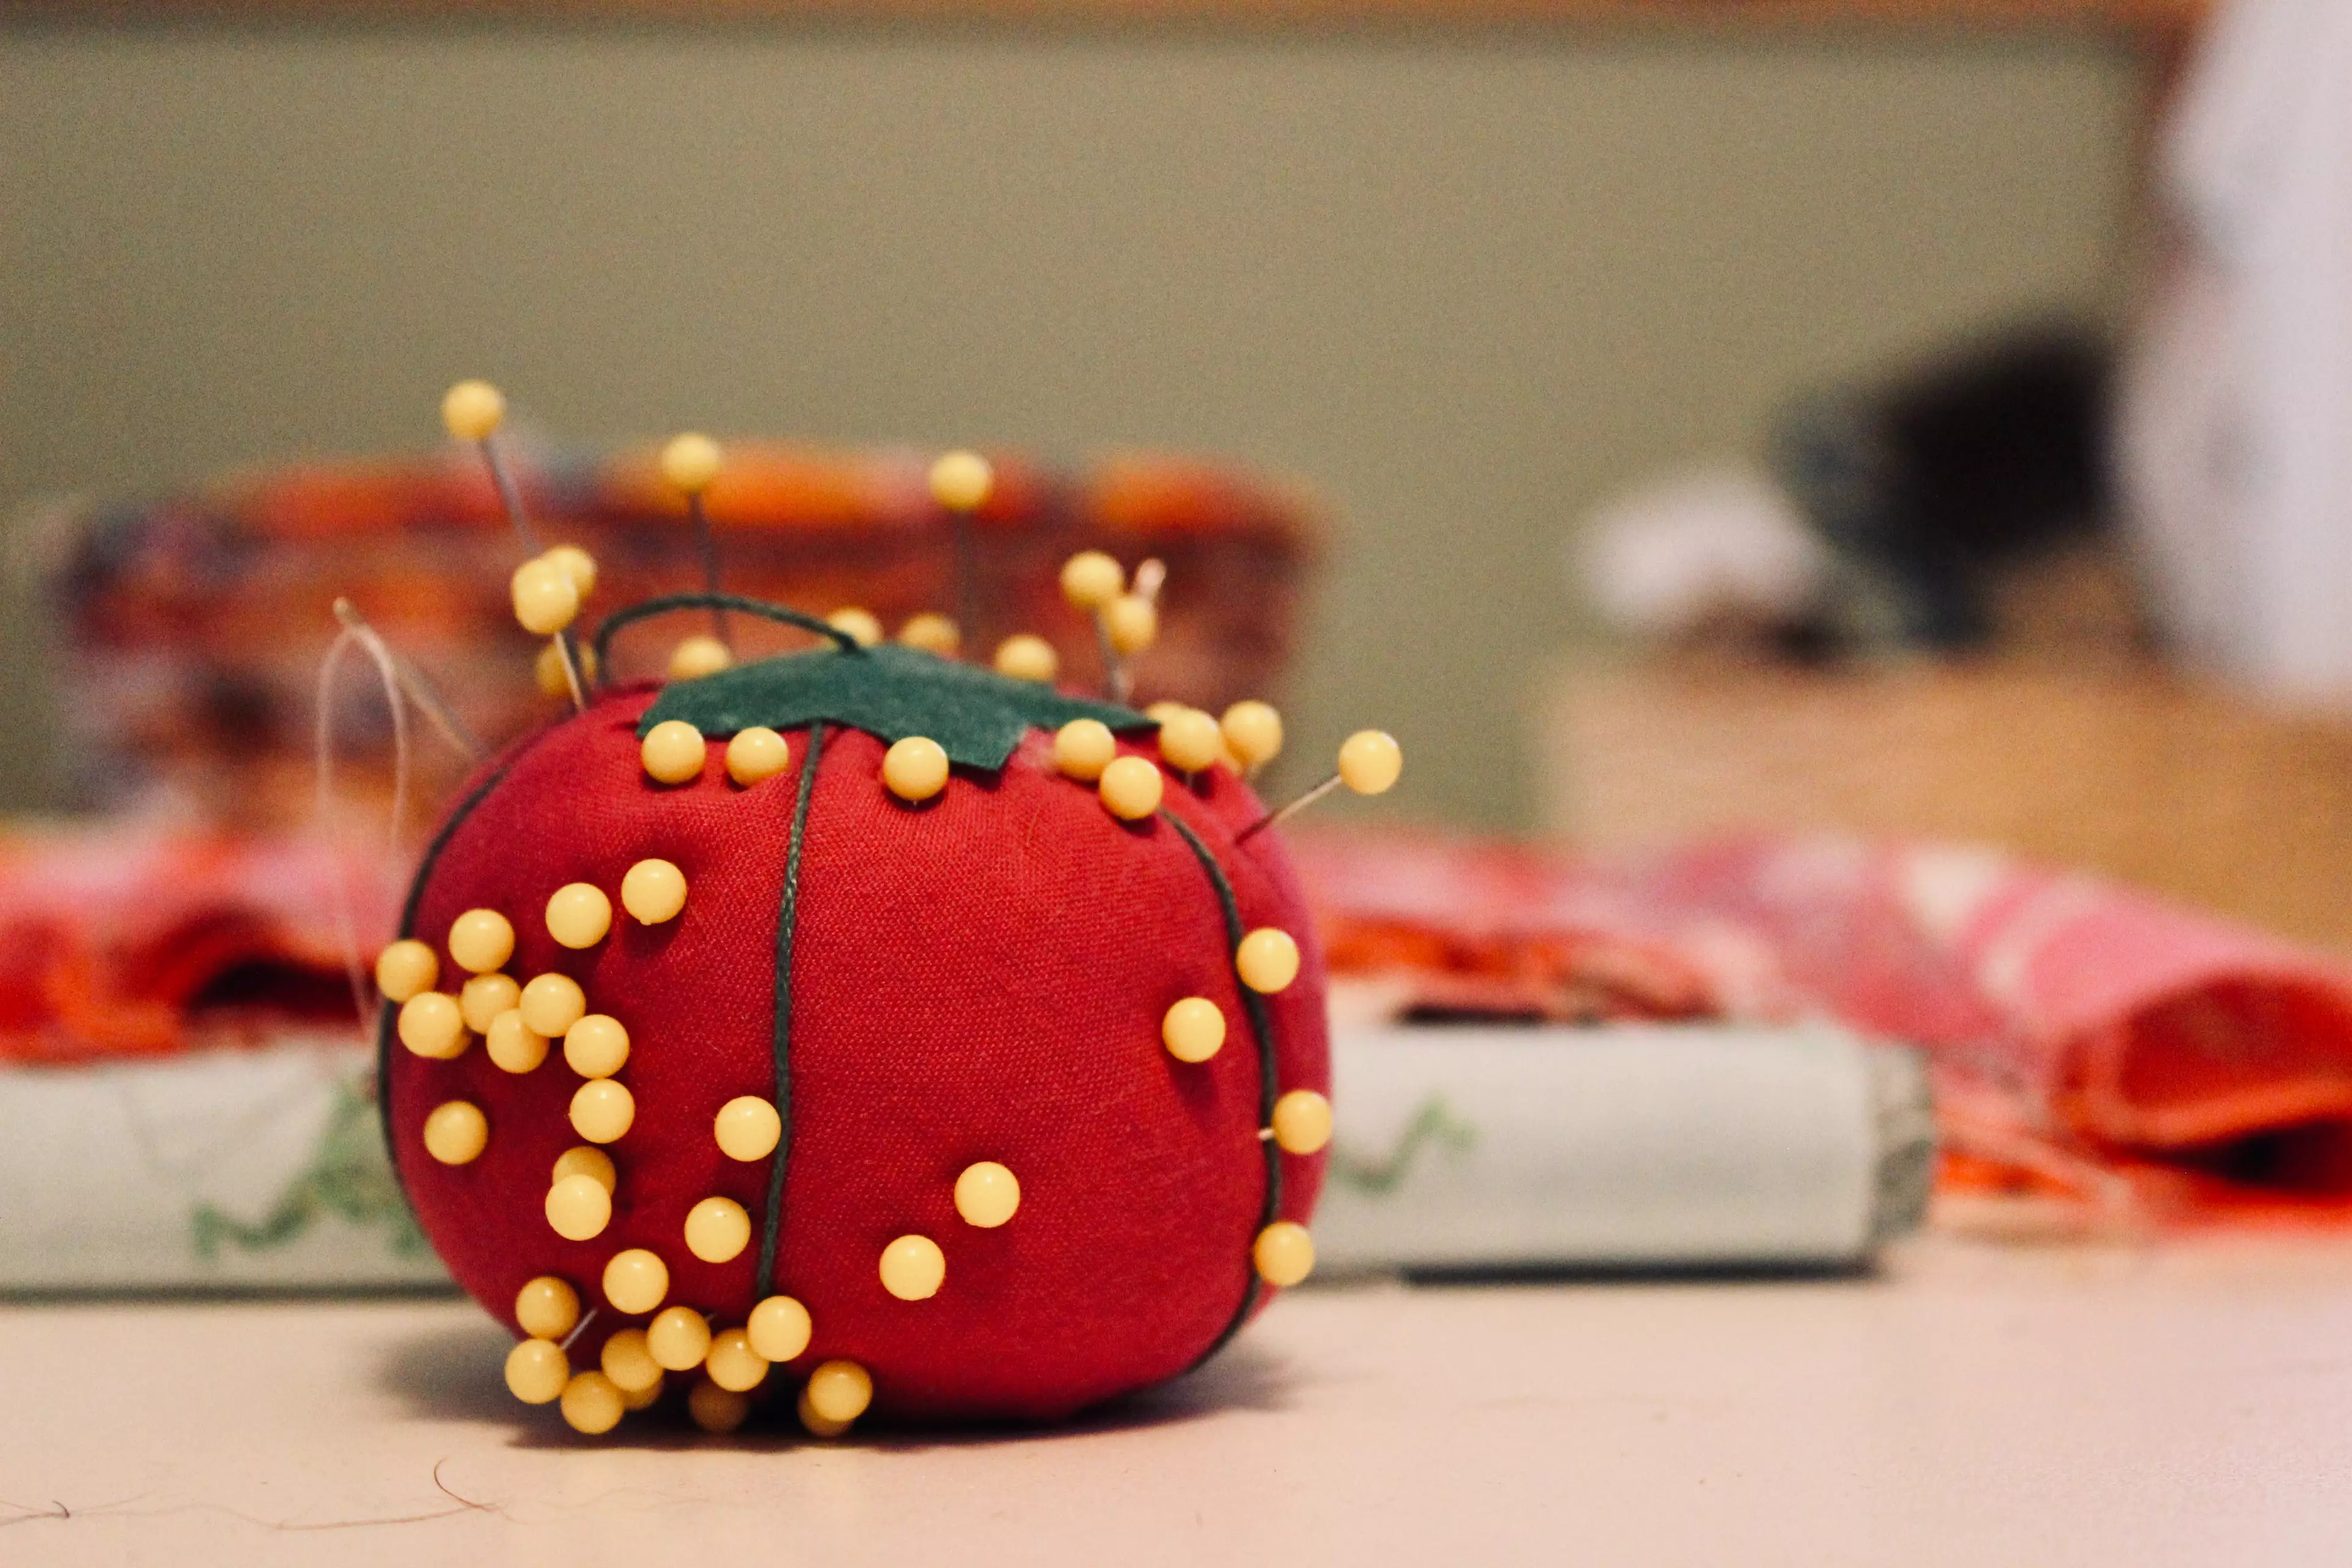 Pin cushion used for sewing (